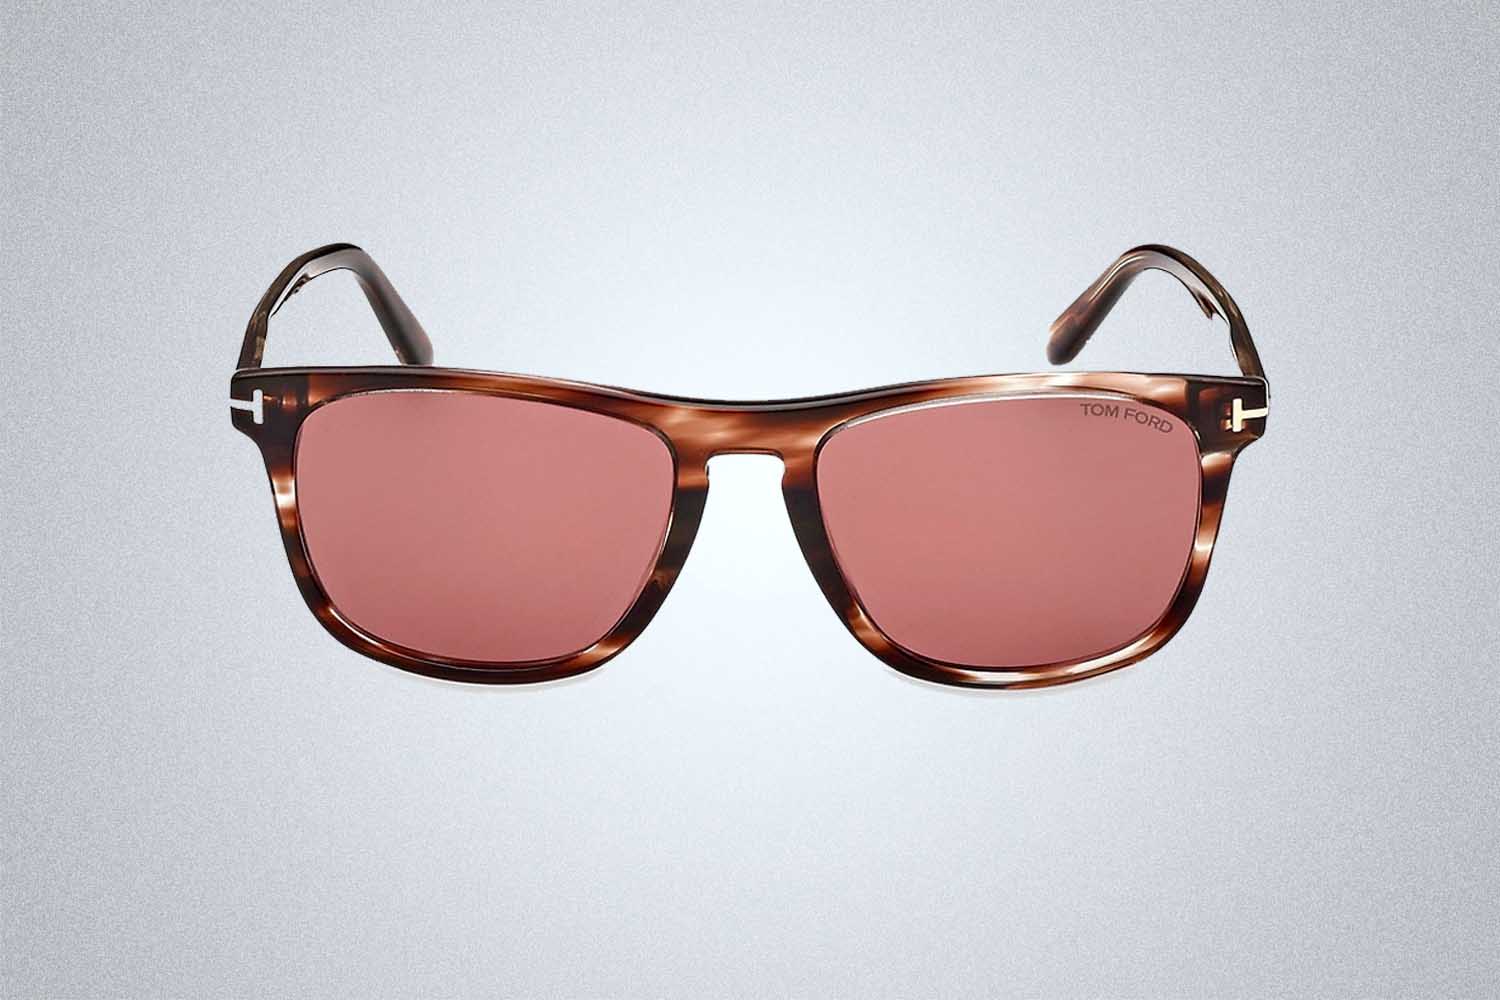 Tom Ford Gerard-02 55MM Square Sunglasses, now on sale